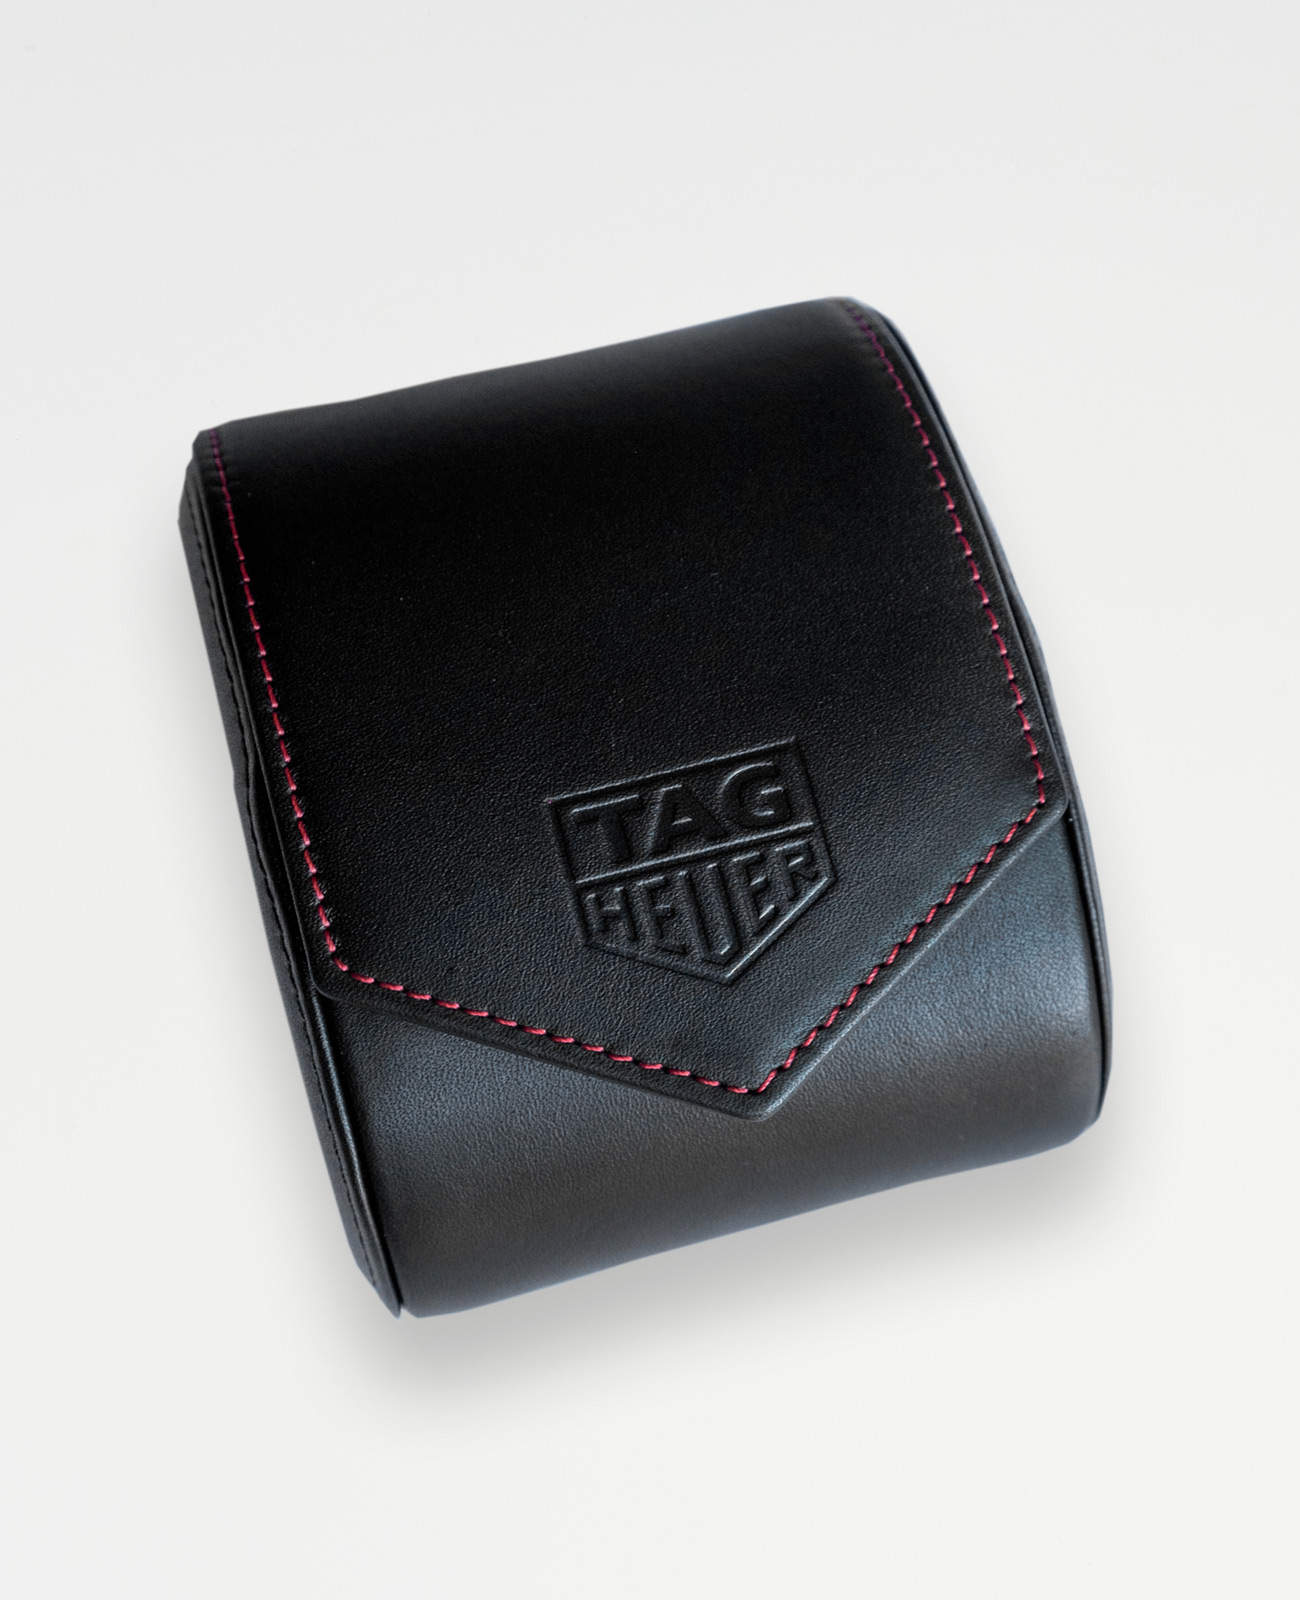 tag heuer leather travel pouch